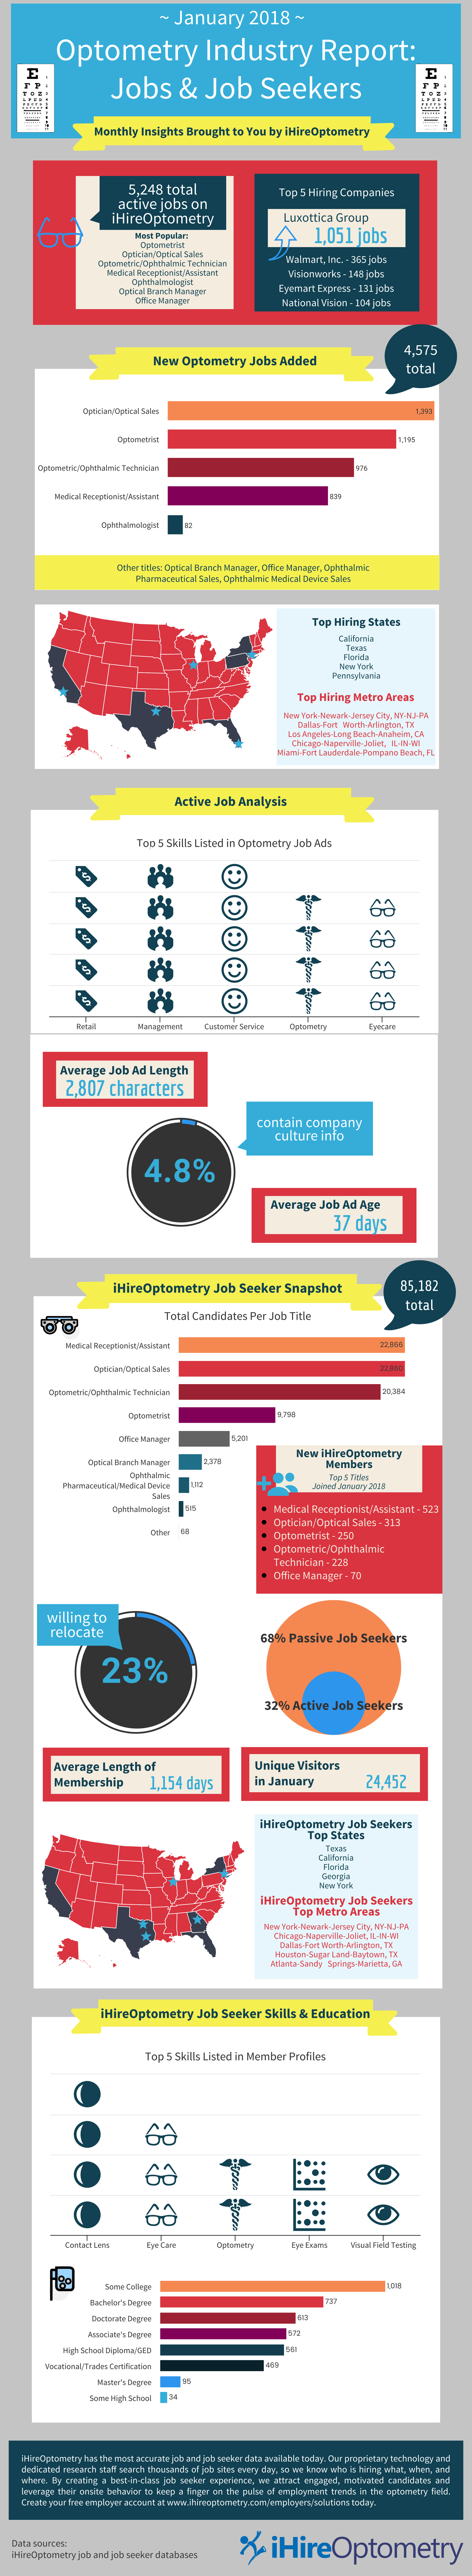 January 2018 Optometry Industry Update Infographic